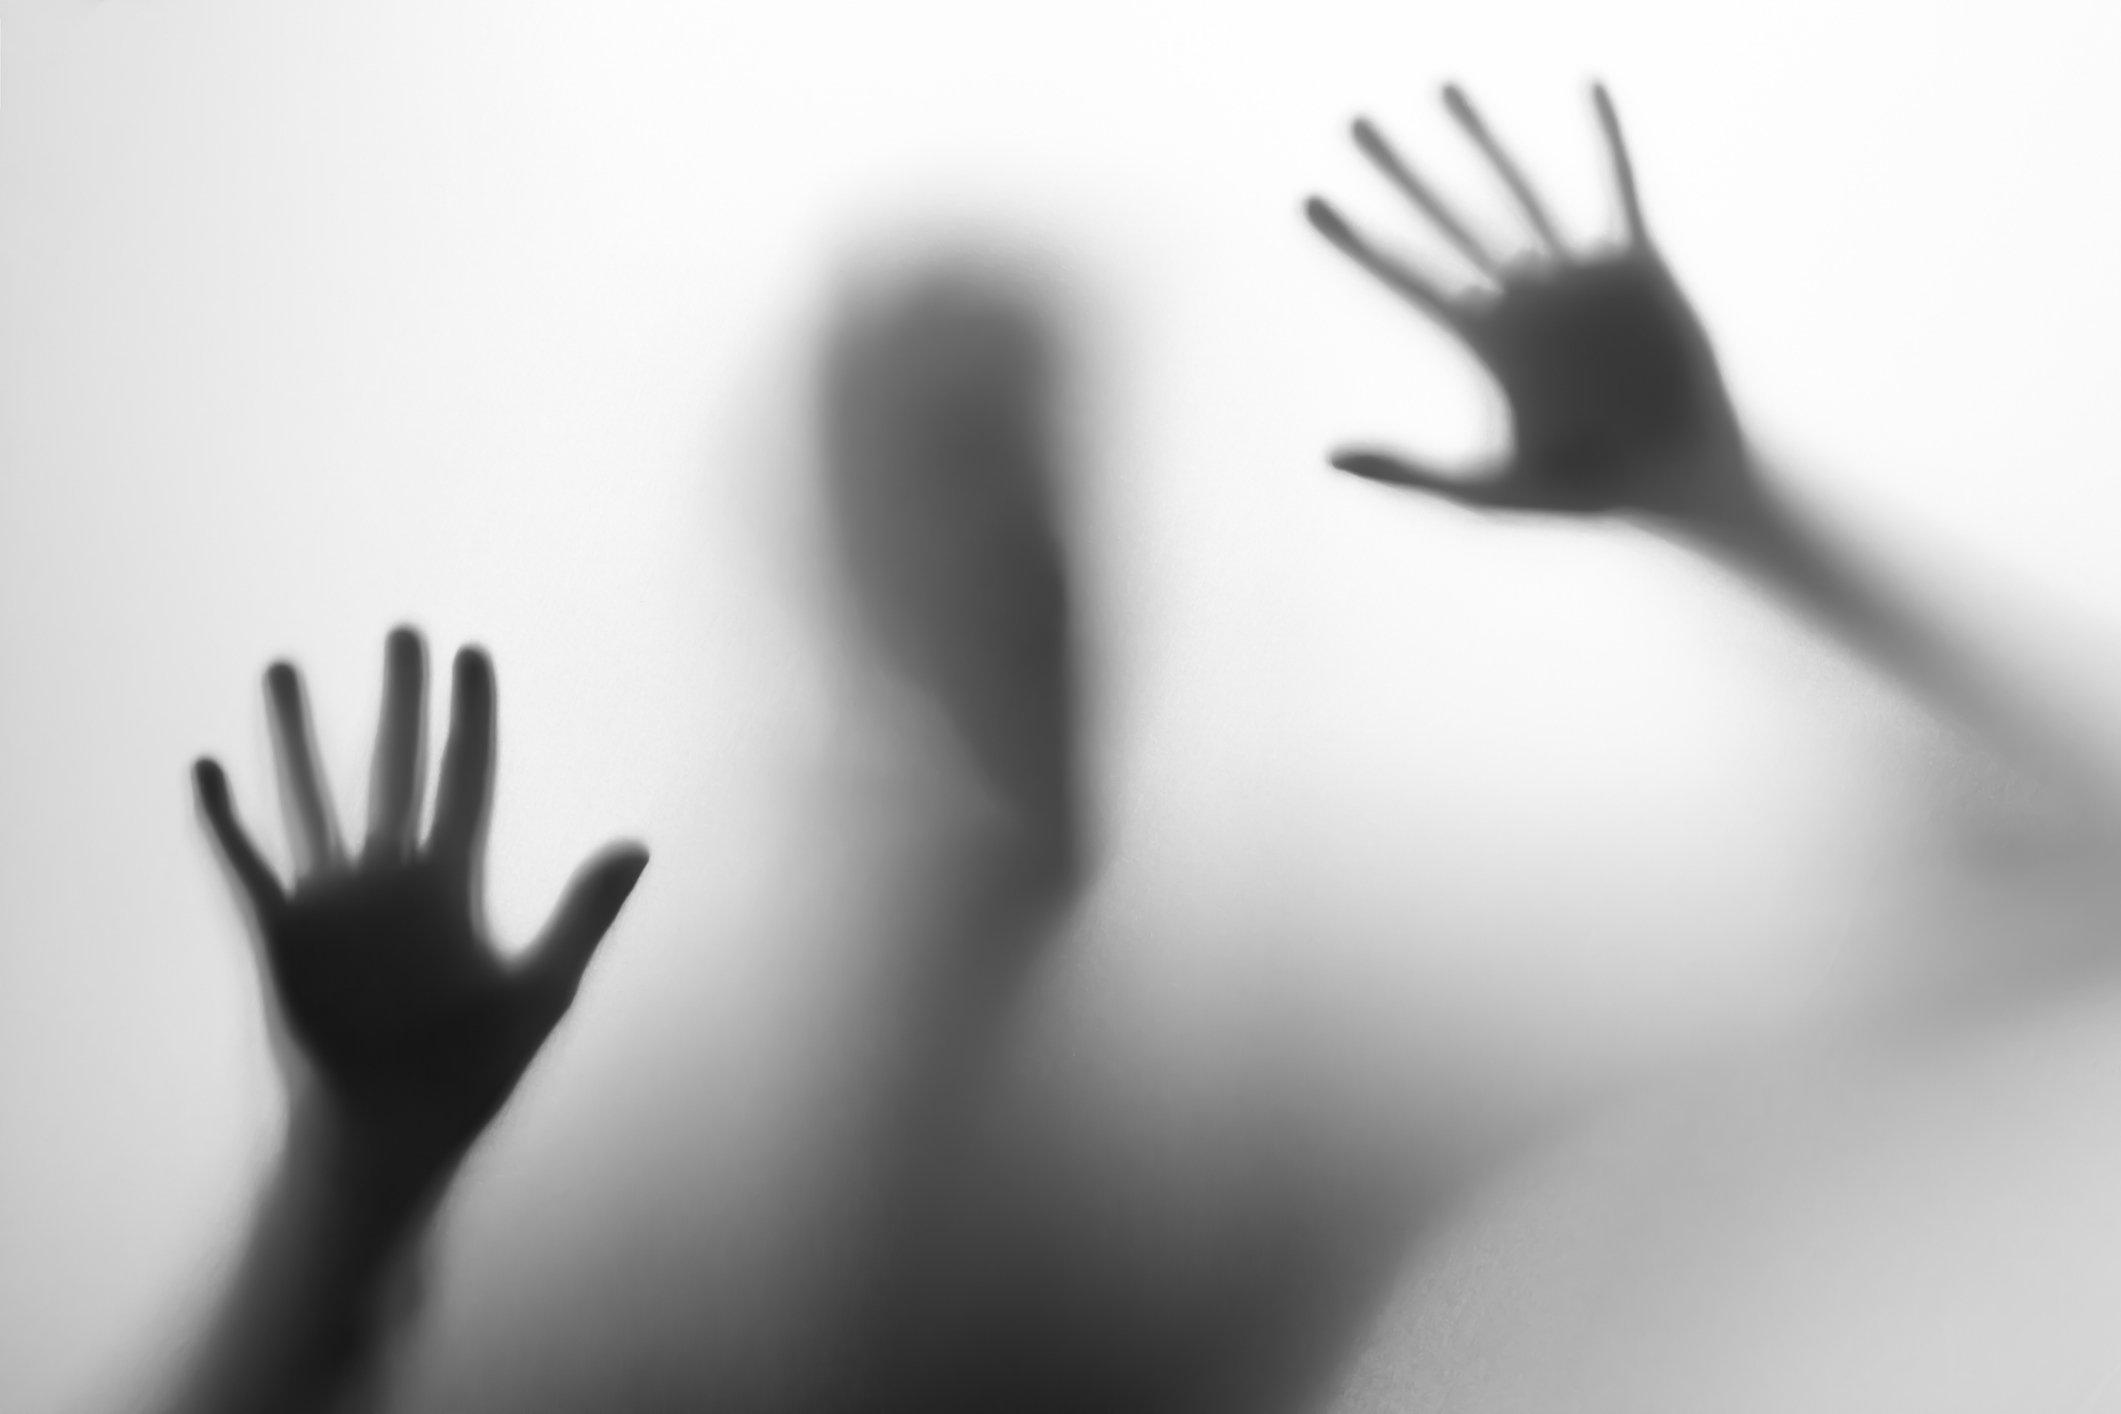 Shadow of hands pressed against opaque surface, evoking mystery in a monochrome setting